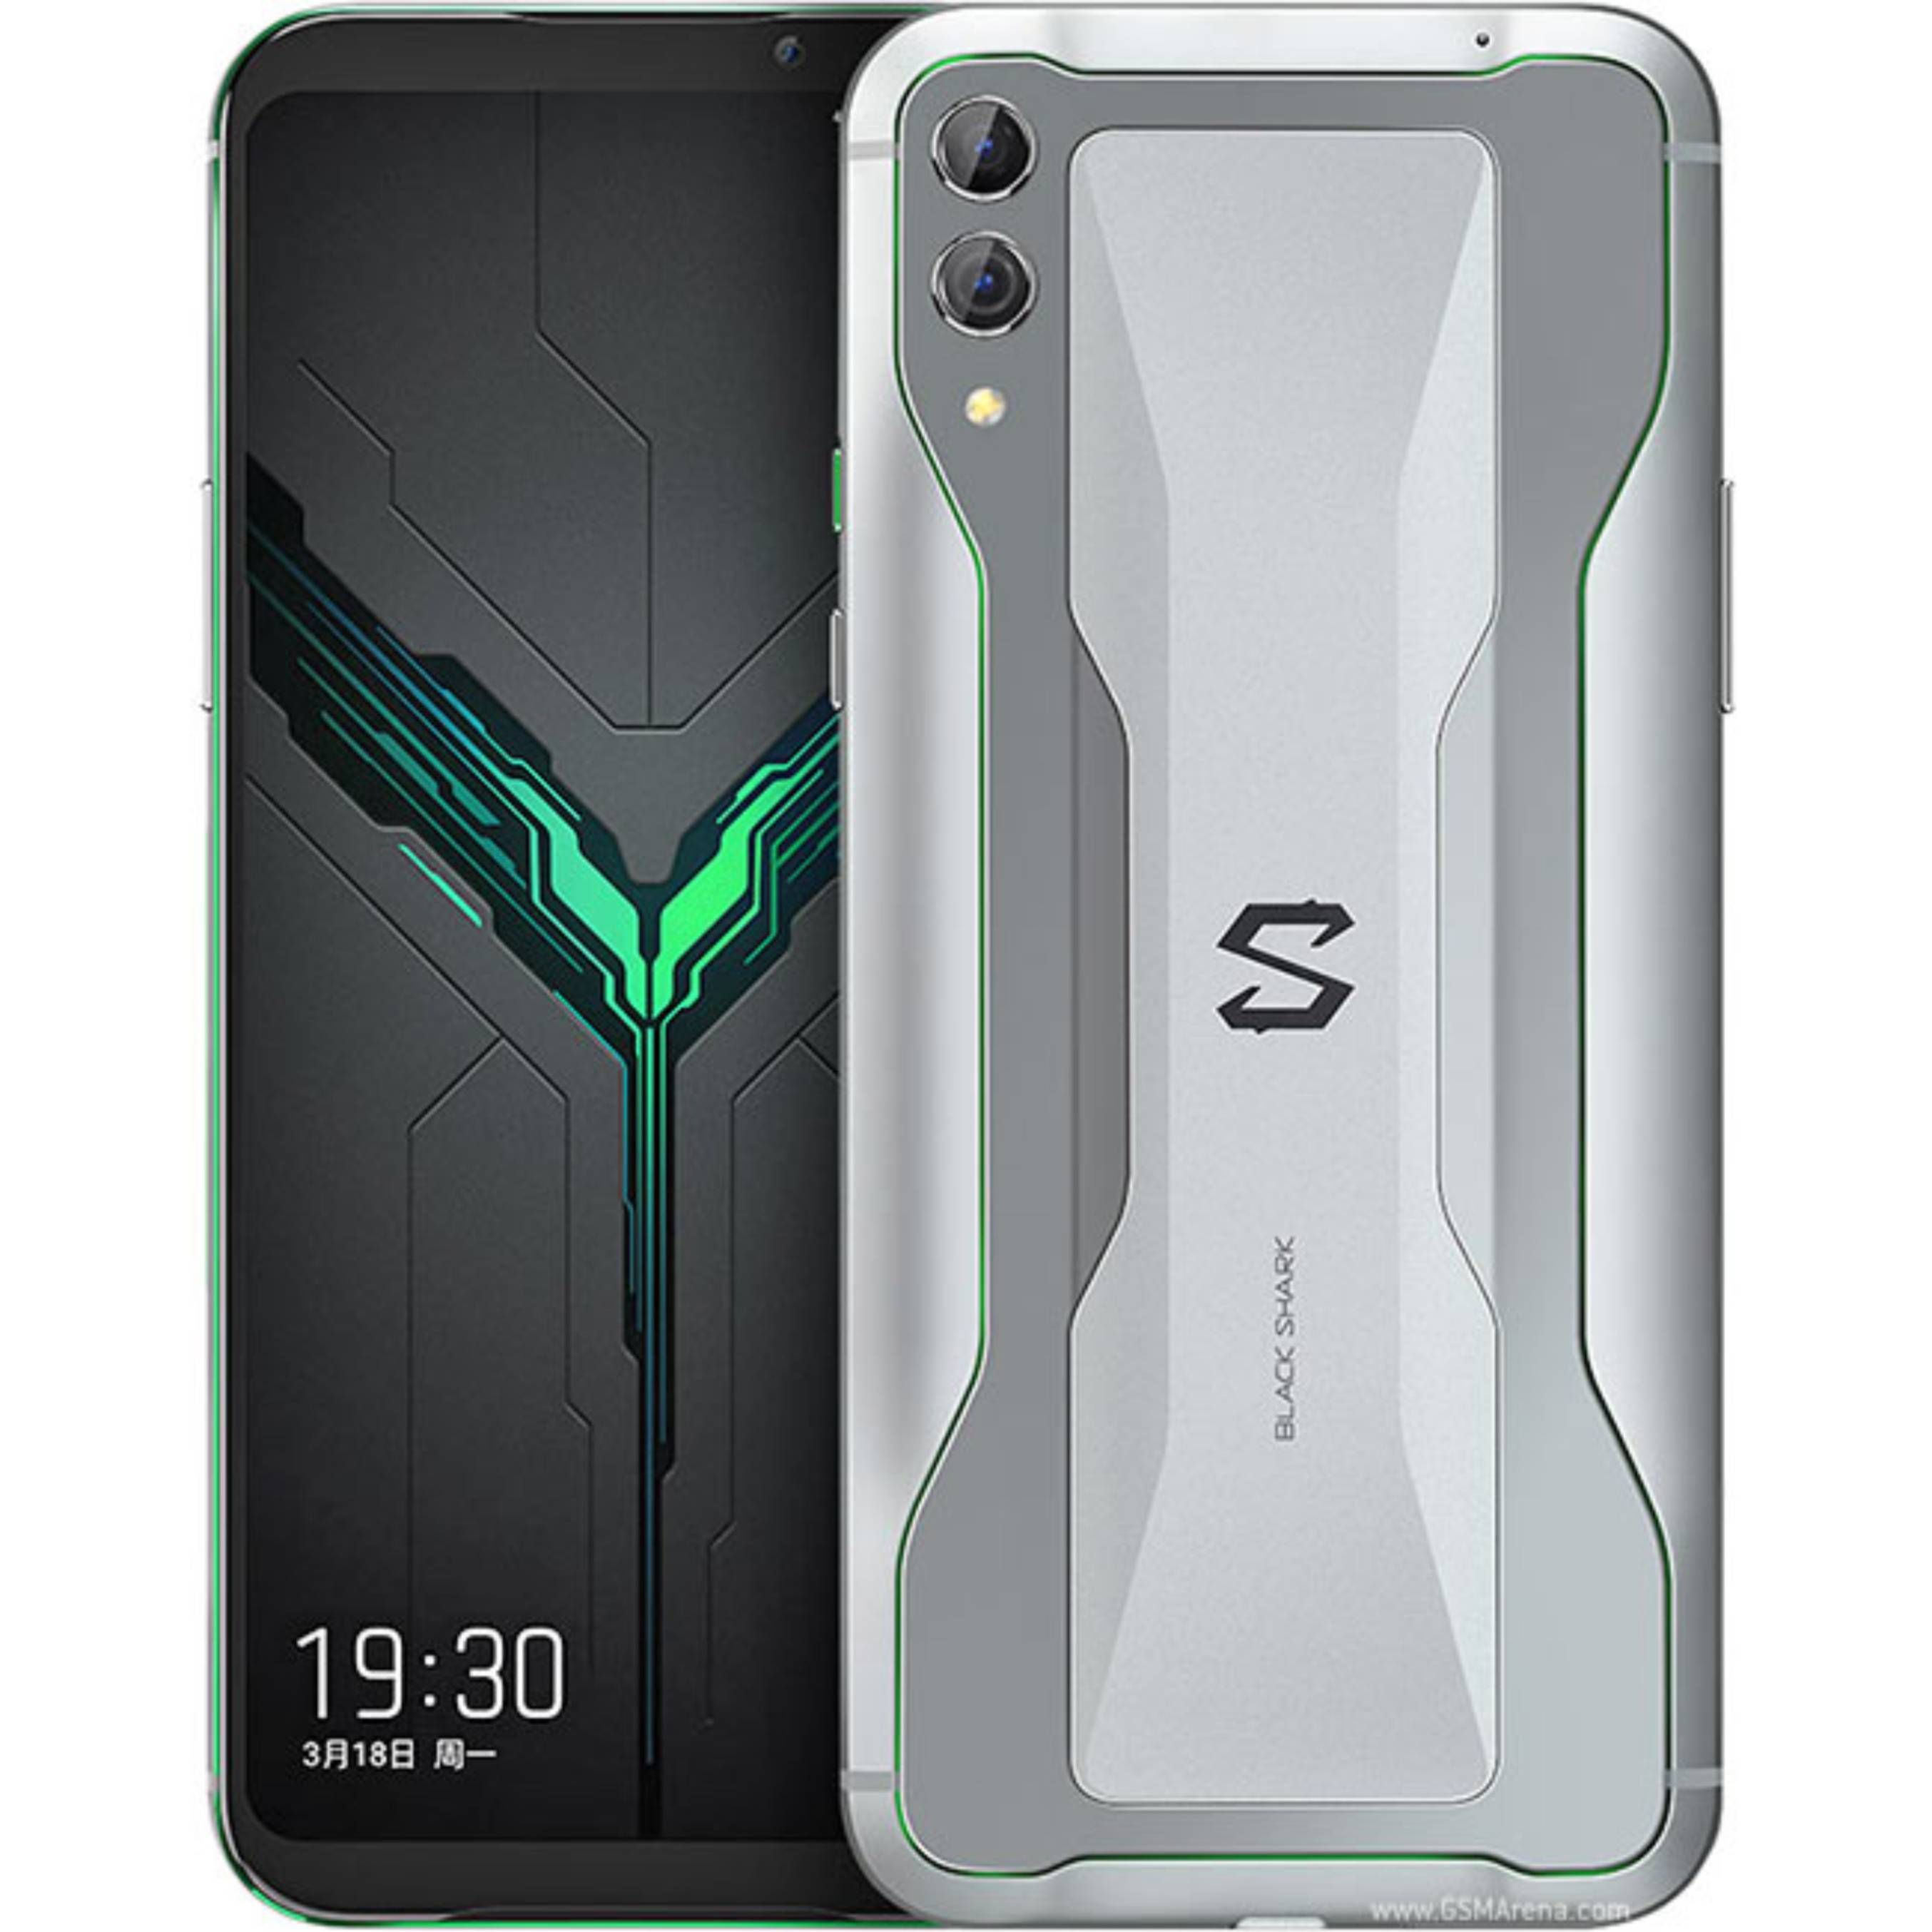 What is Xiaomi Black Shark 2 Pro Screen Replacement Cost in Nairobi?